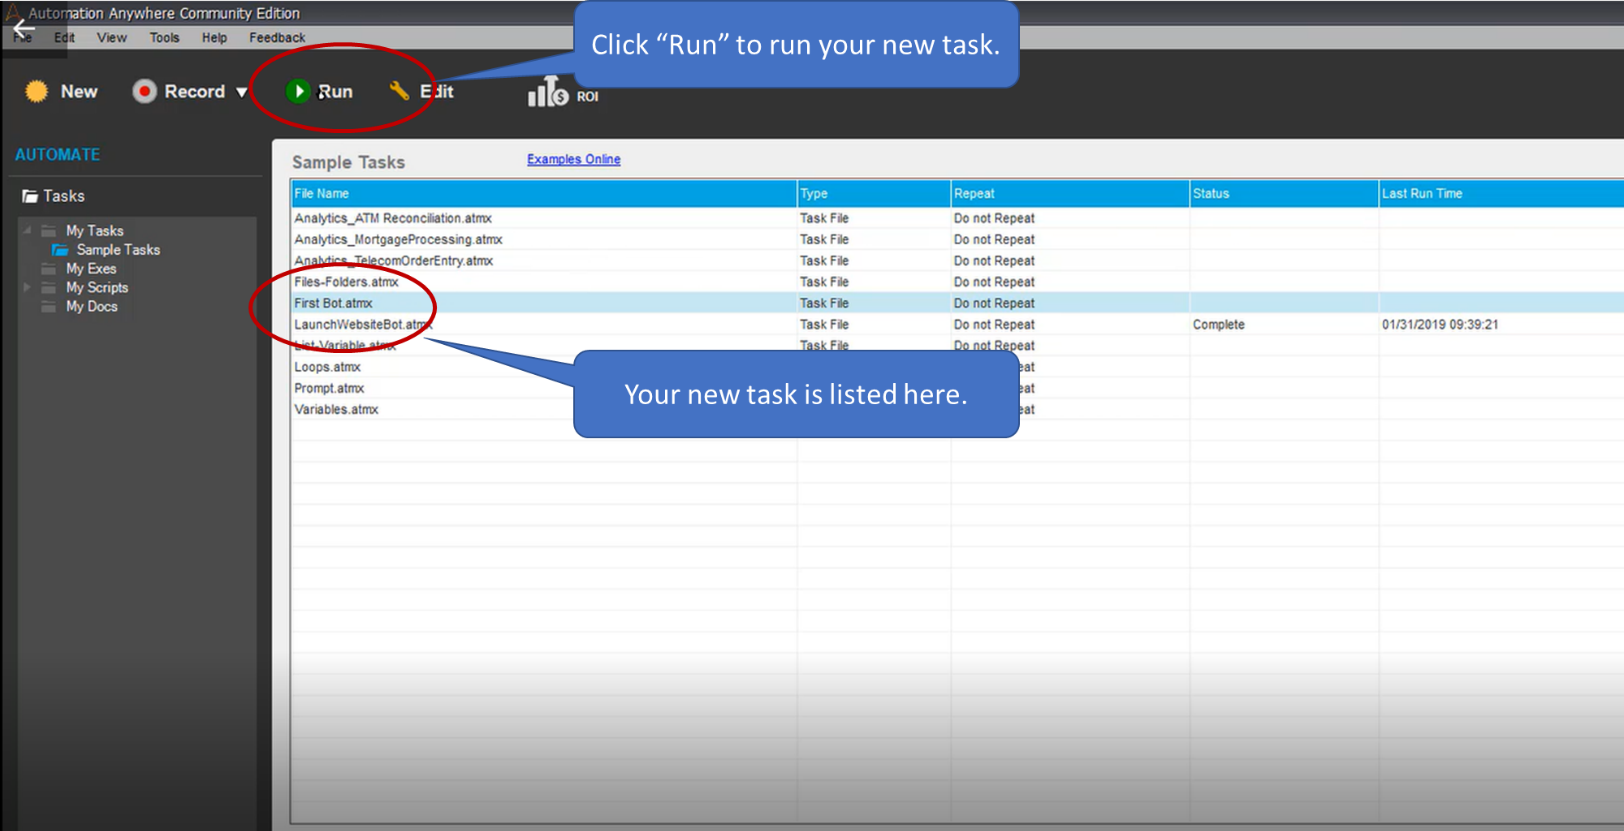 Find your task in the list and click Run to initiate the automation.